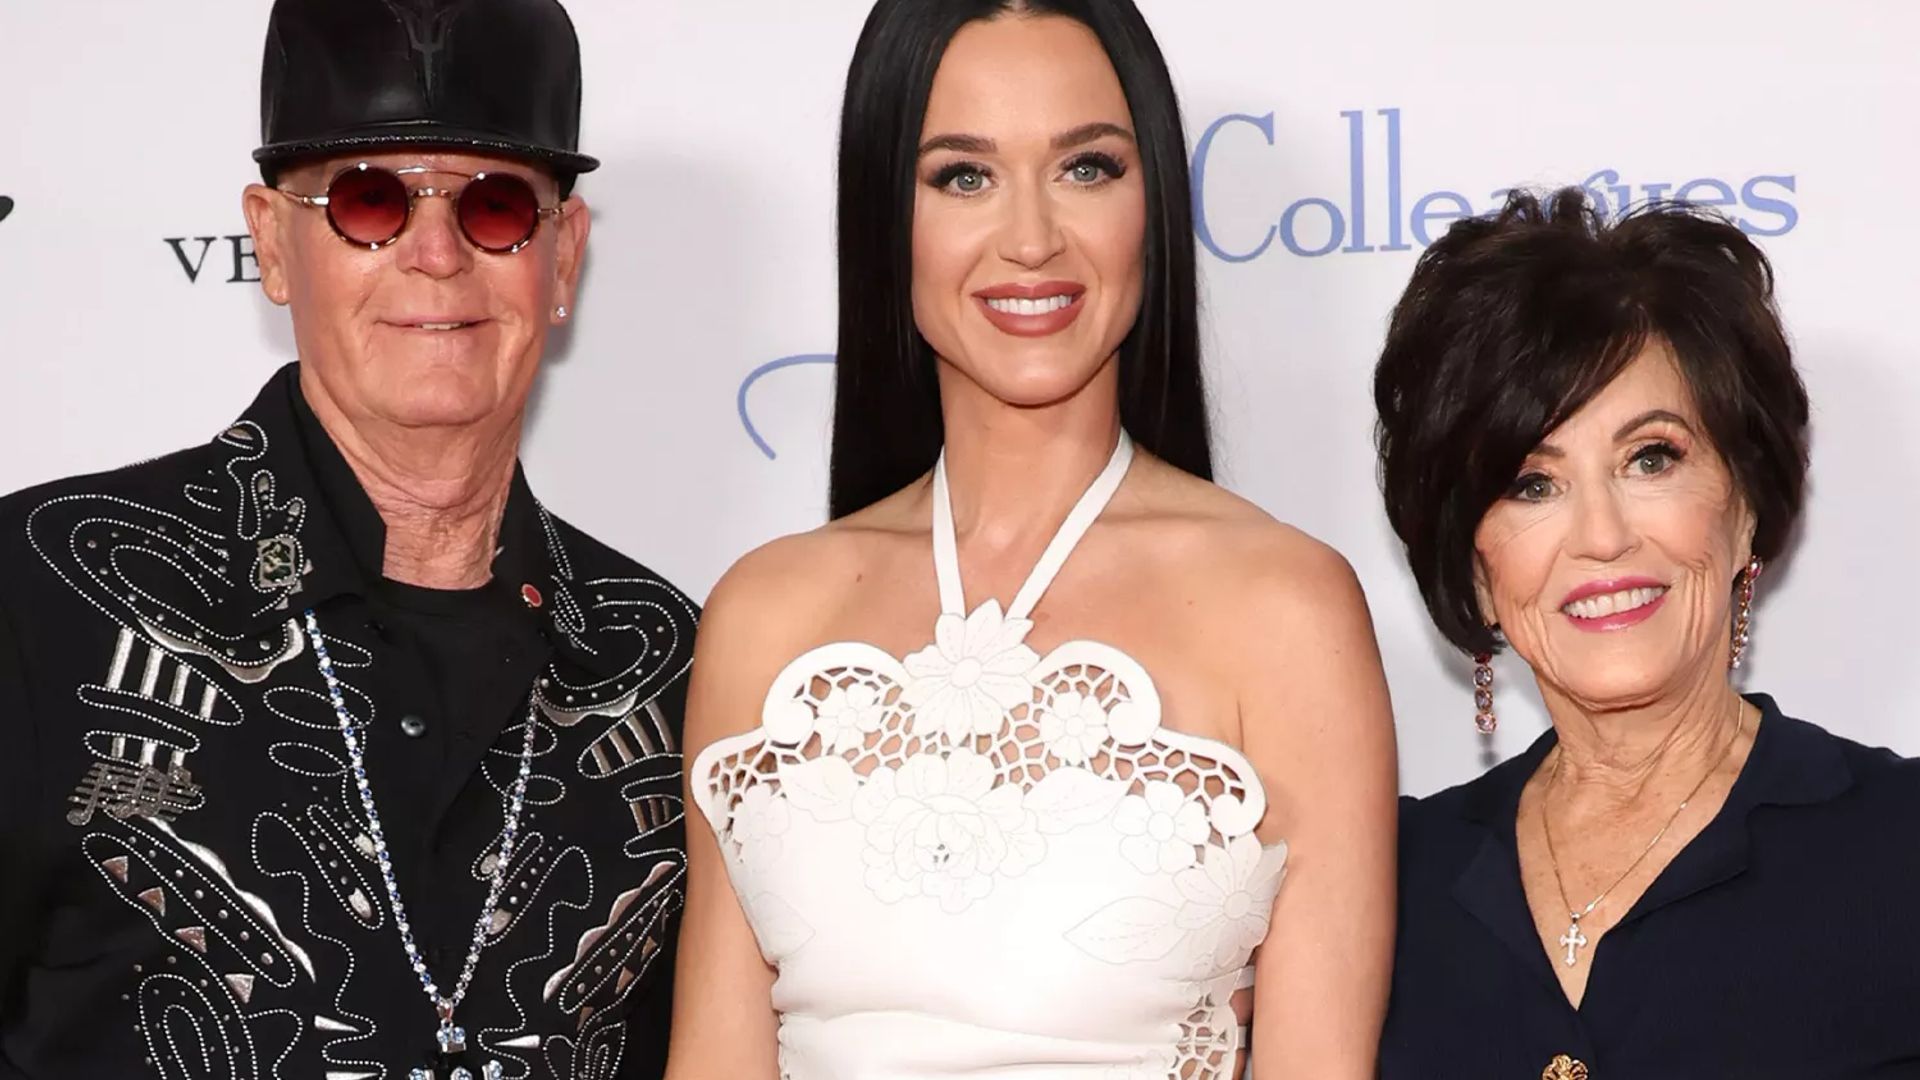 Katy Perry steals the show as she steps out with family in stunning frock on the red carpet